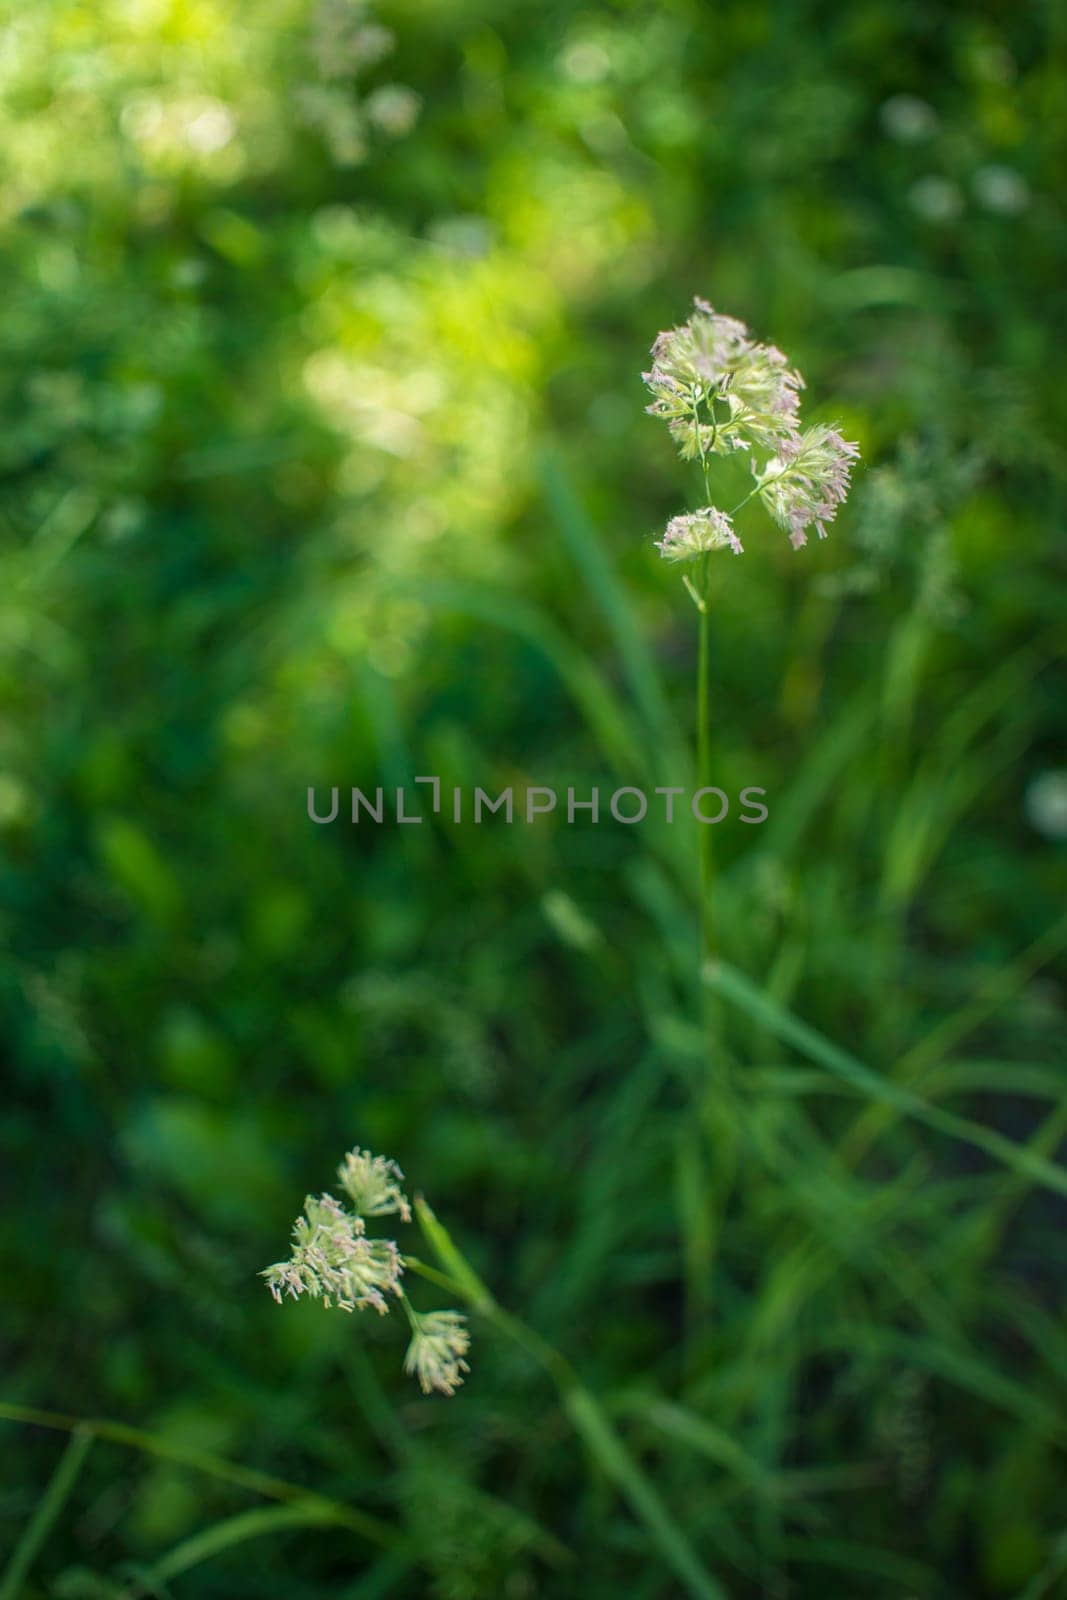 flowering ears of weeds. natural lawn in the bright sun. natural summer background with green grass